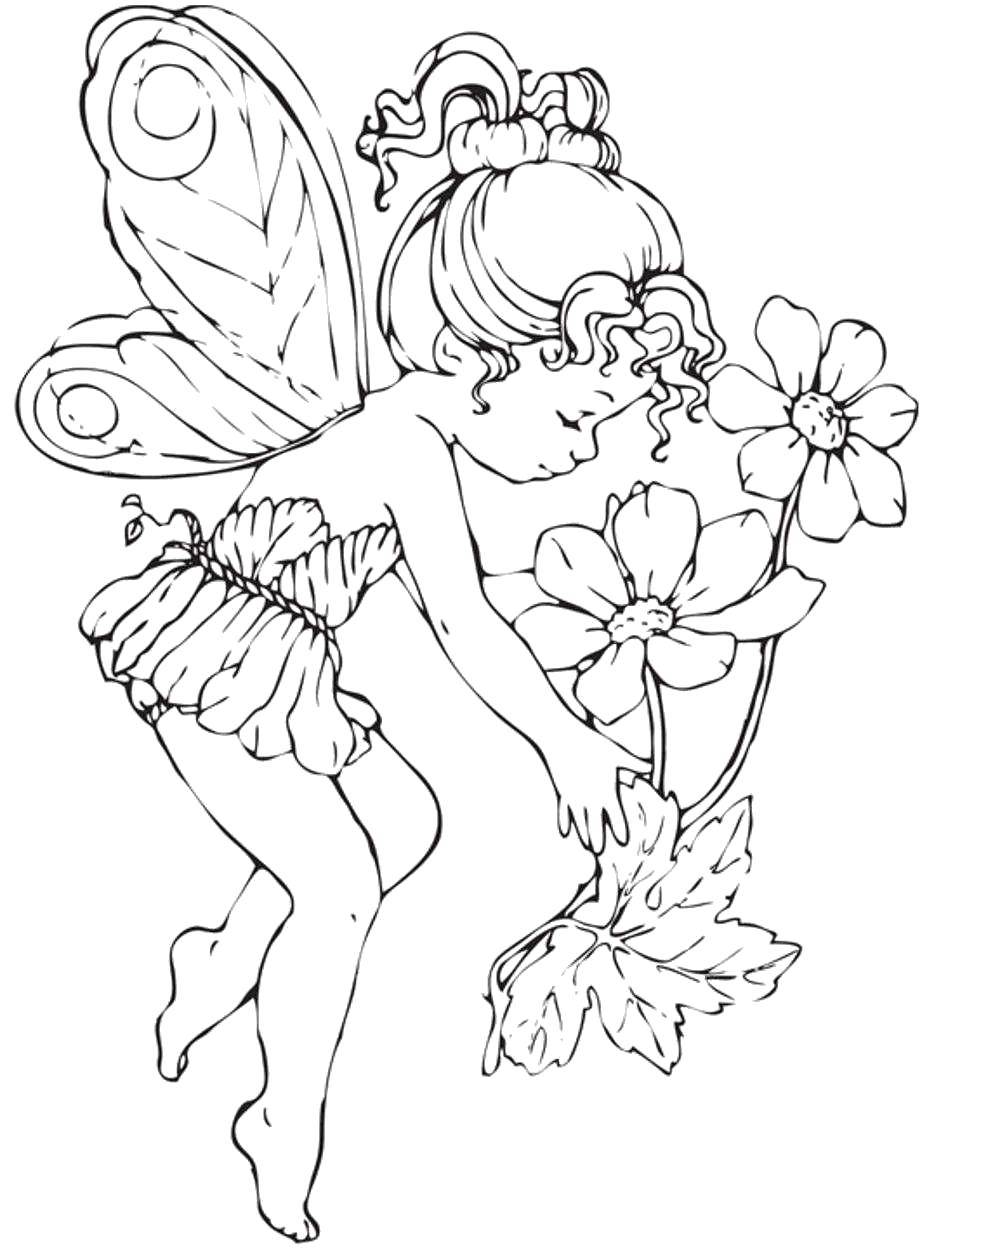 Coloring Flower fairy. Category fairy. Tags:  Fairy, forest, fairy tale.